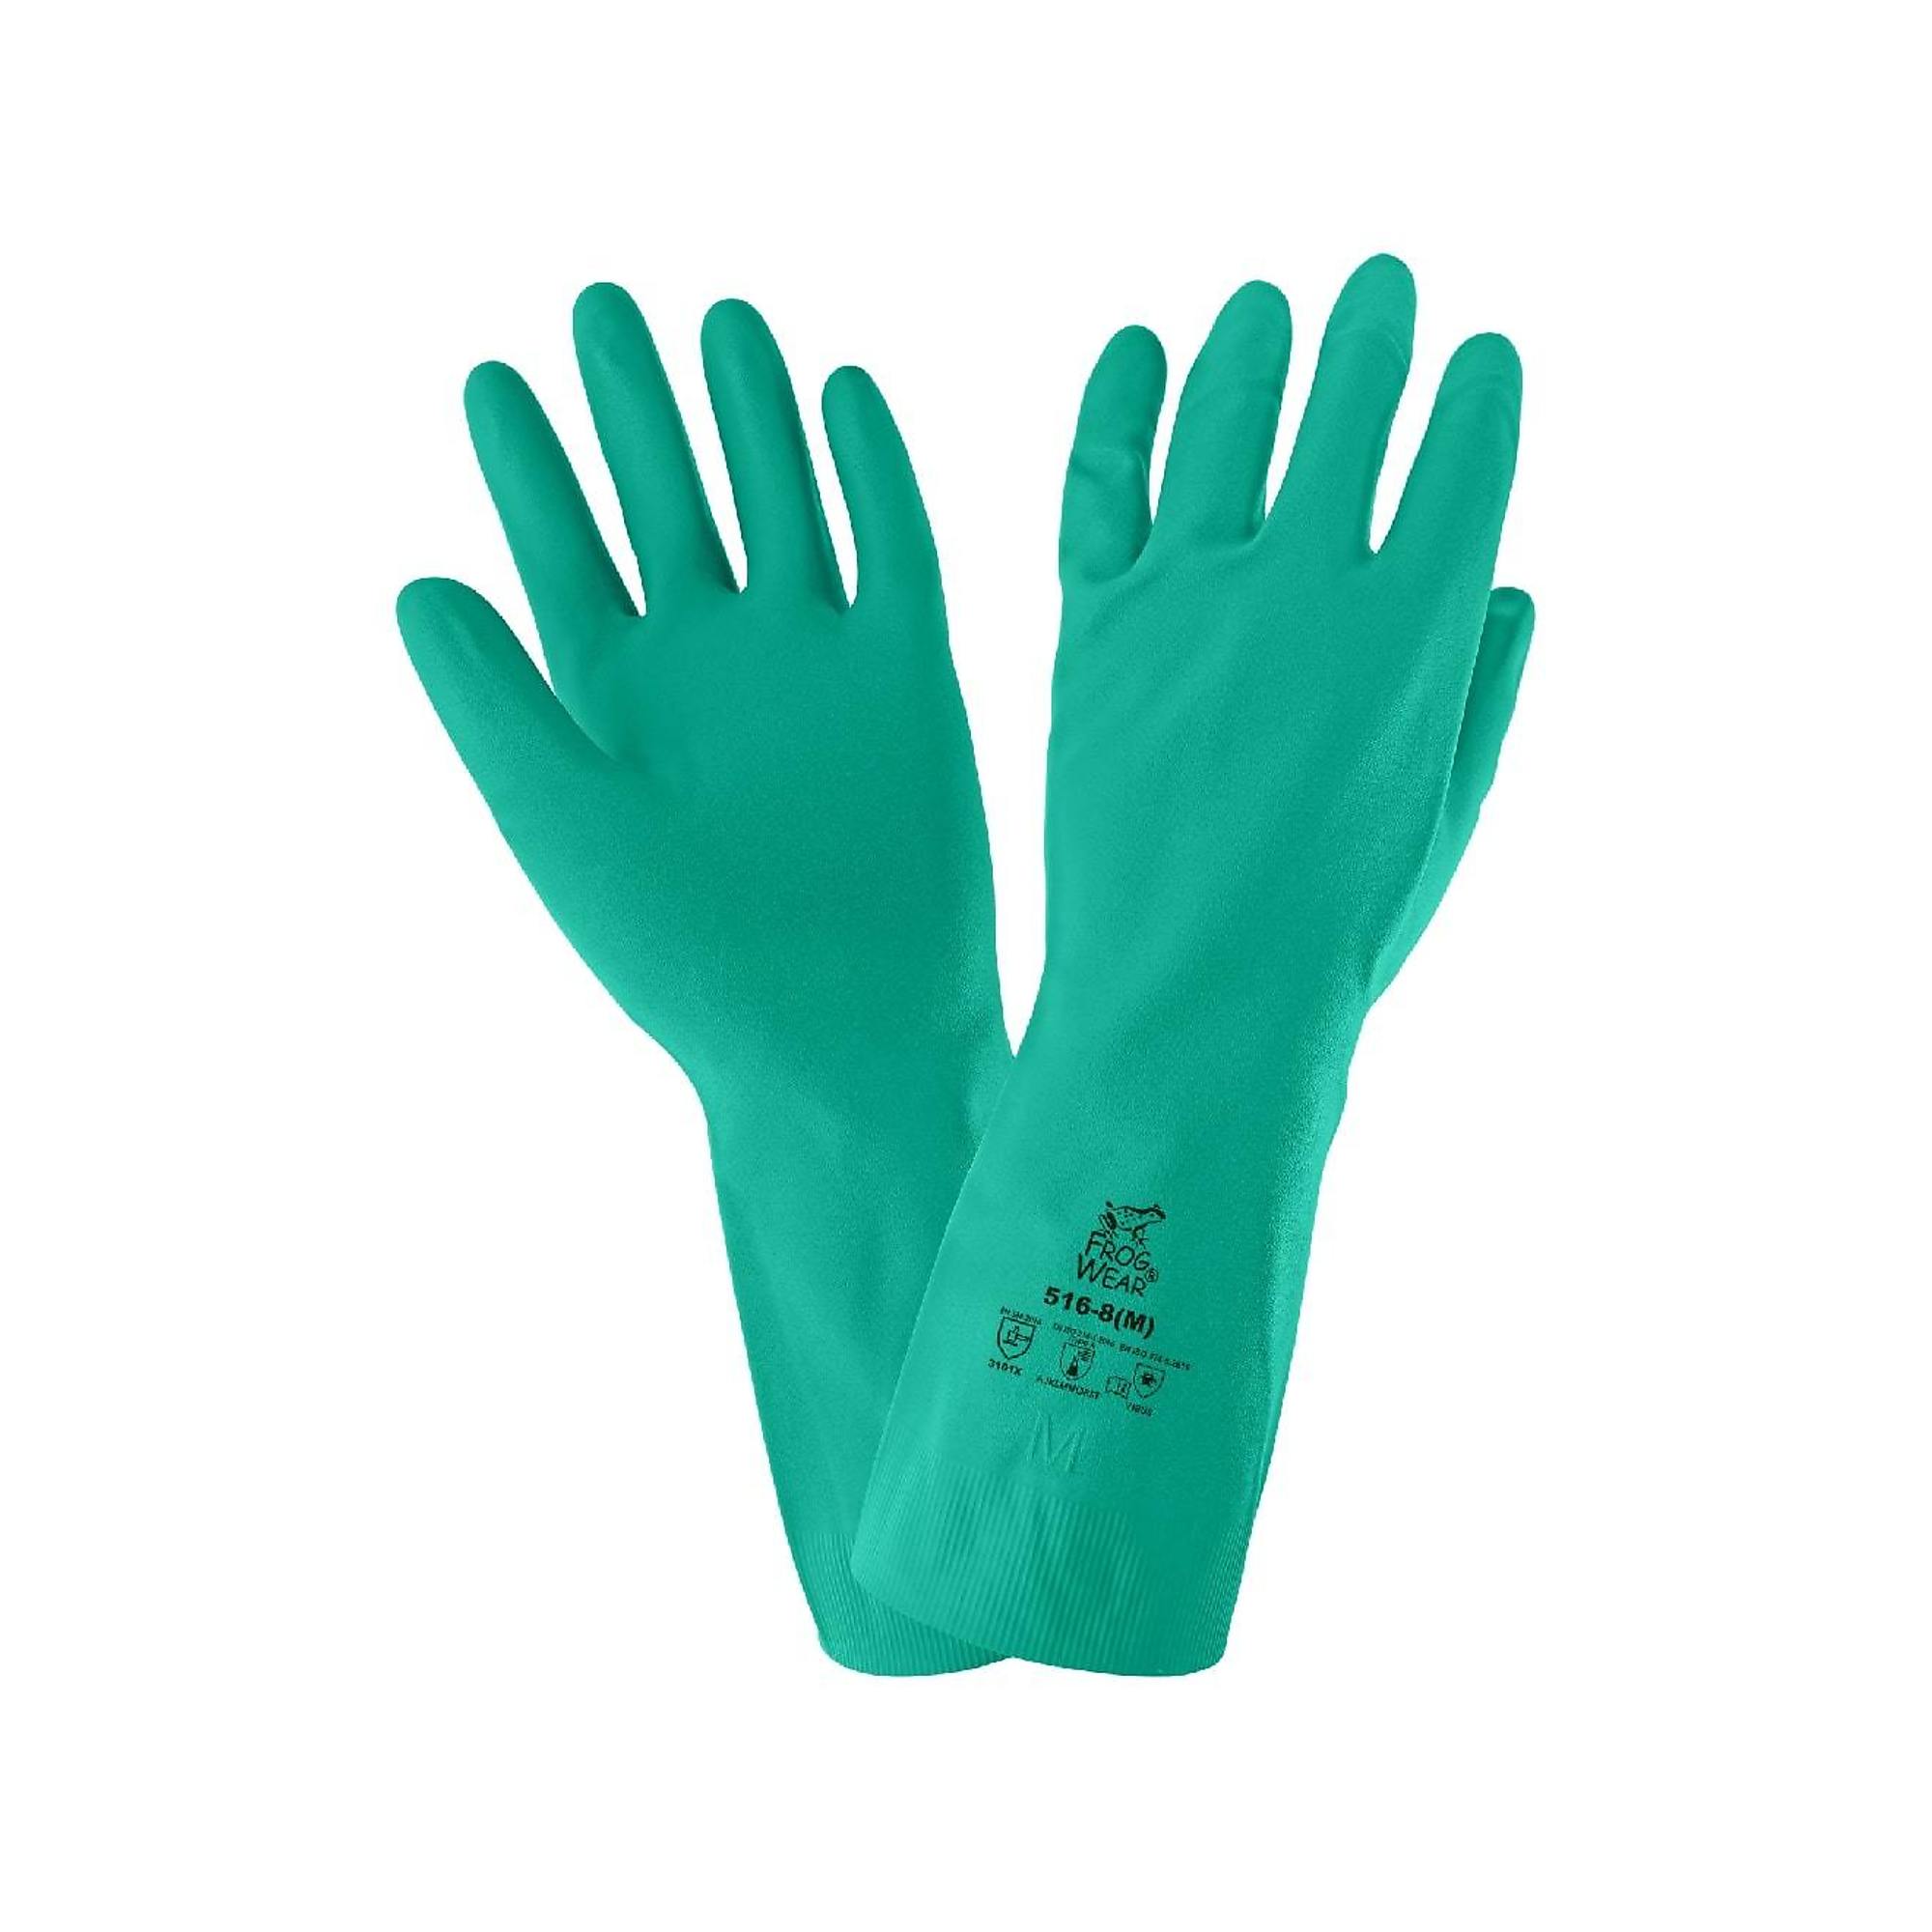 FrogWear, FrogWear 13Inch, 16-Mil, Sea Green Nitrile Gloves - 12 Pairs, Size M, Color Green, Included (qty.) 12 Model 516-8(M)